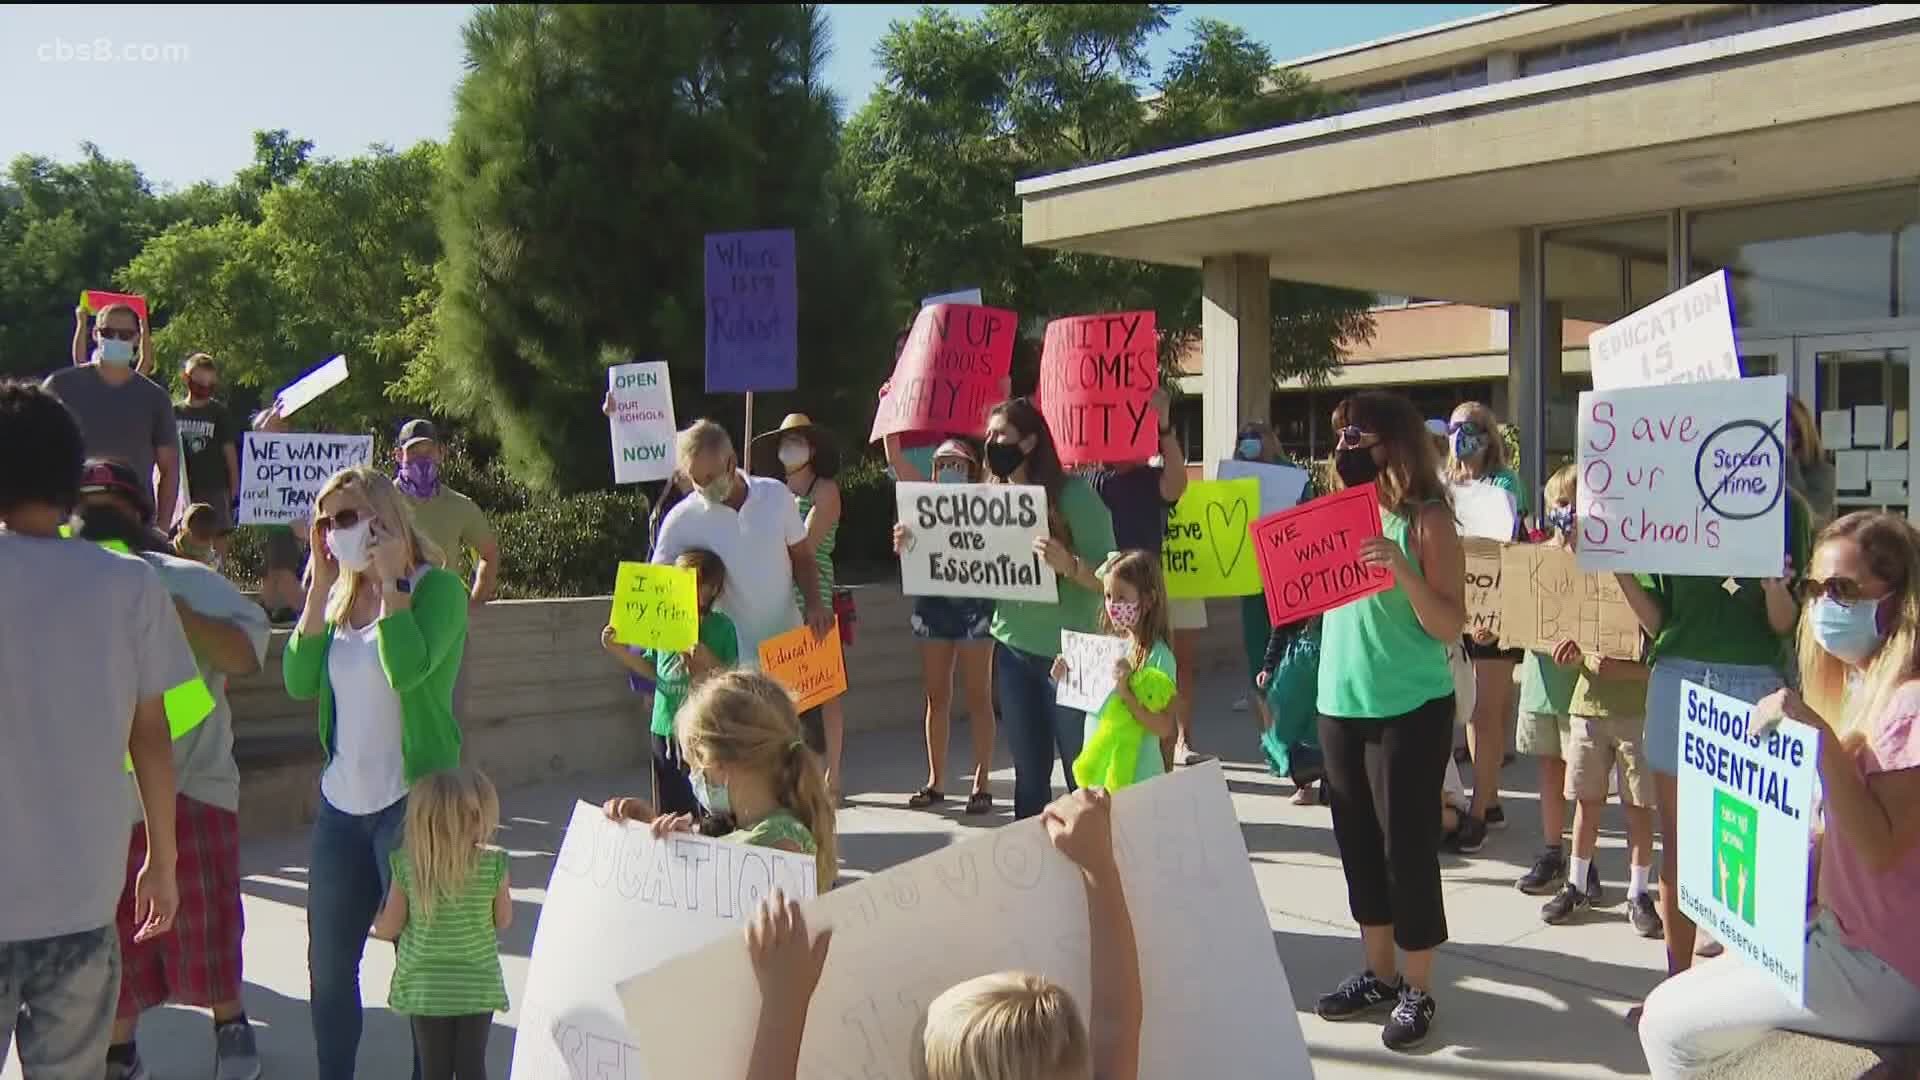 Some parents say it's time for San Diego Unified Schools to reopen no matter what tier the county is in.